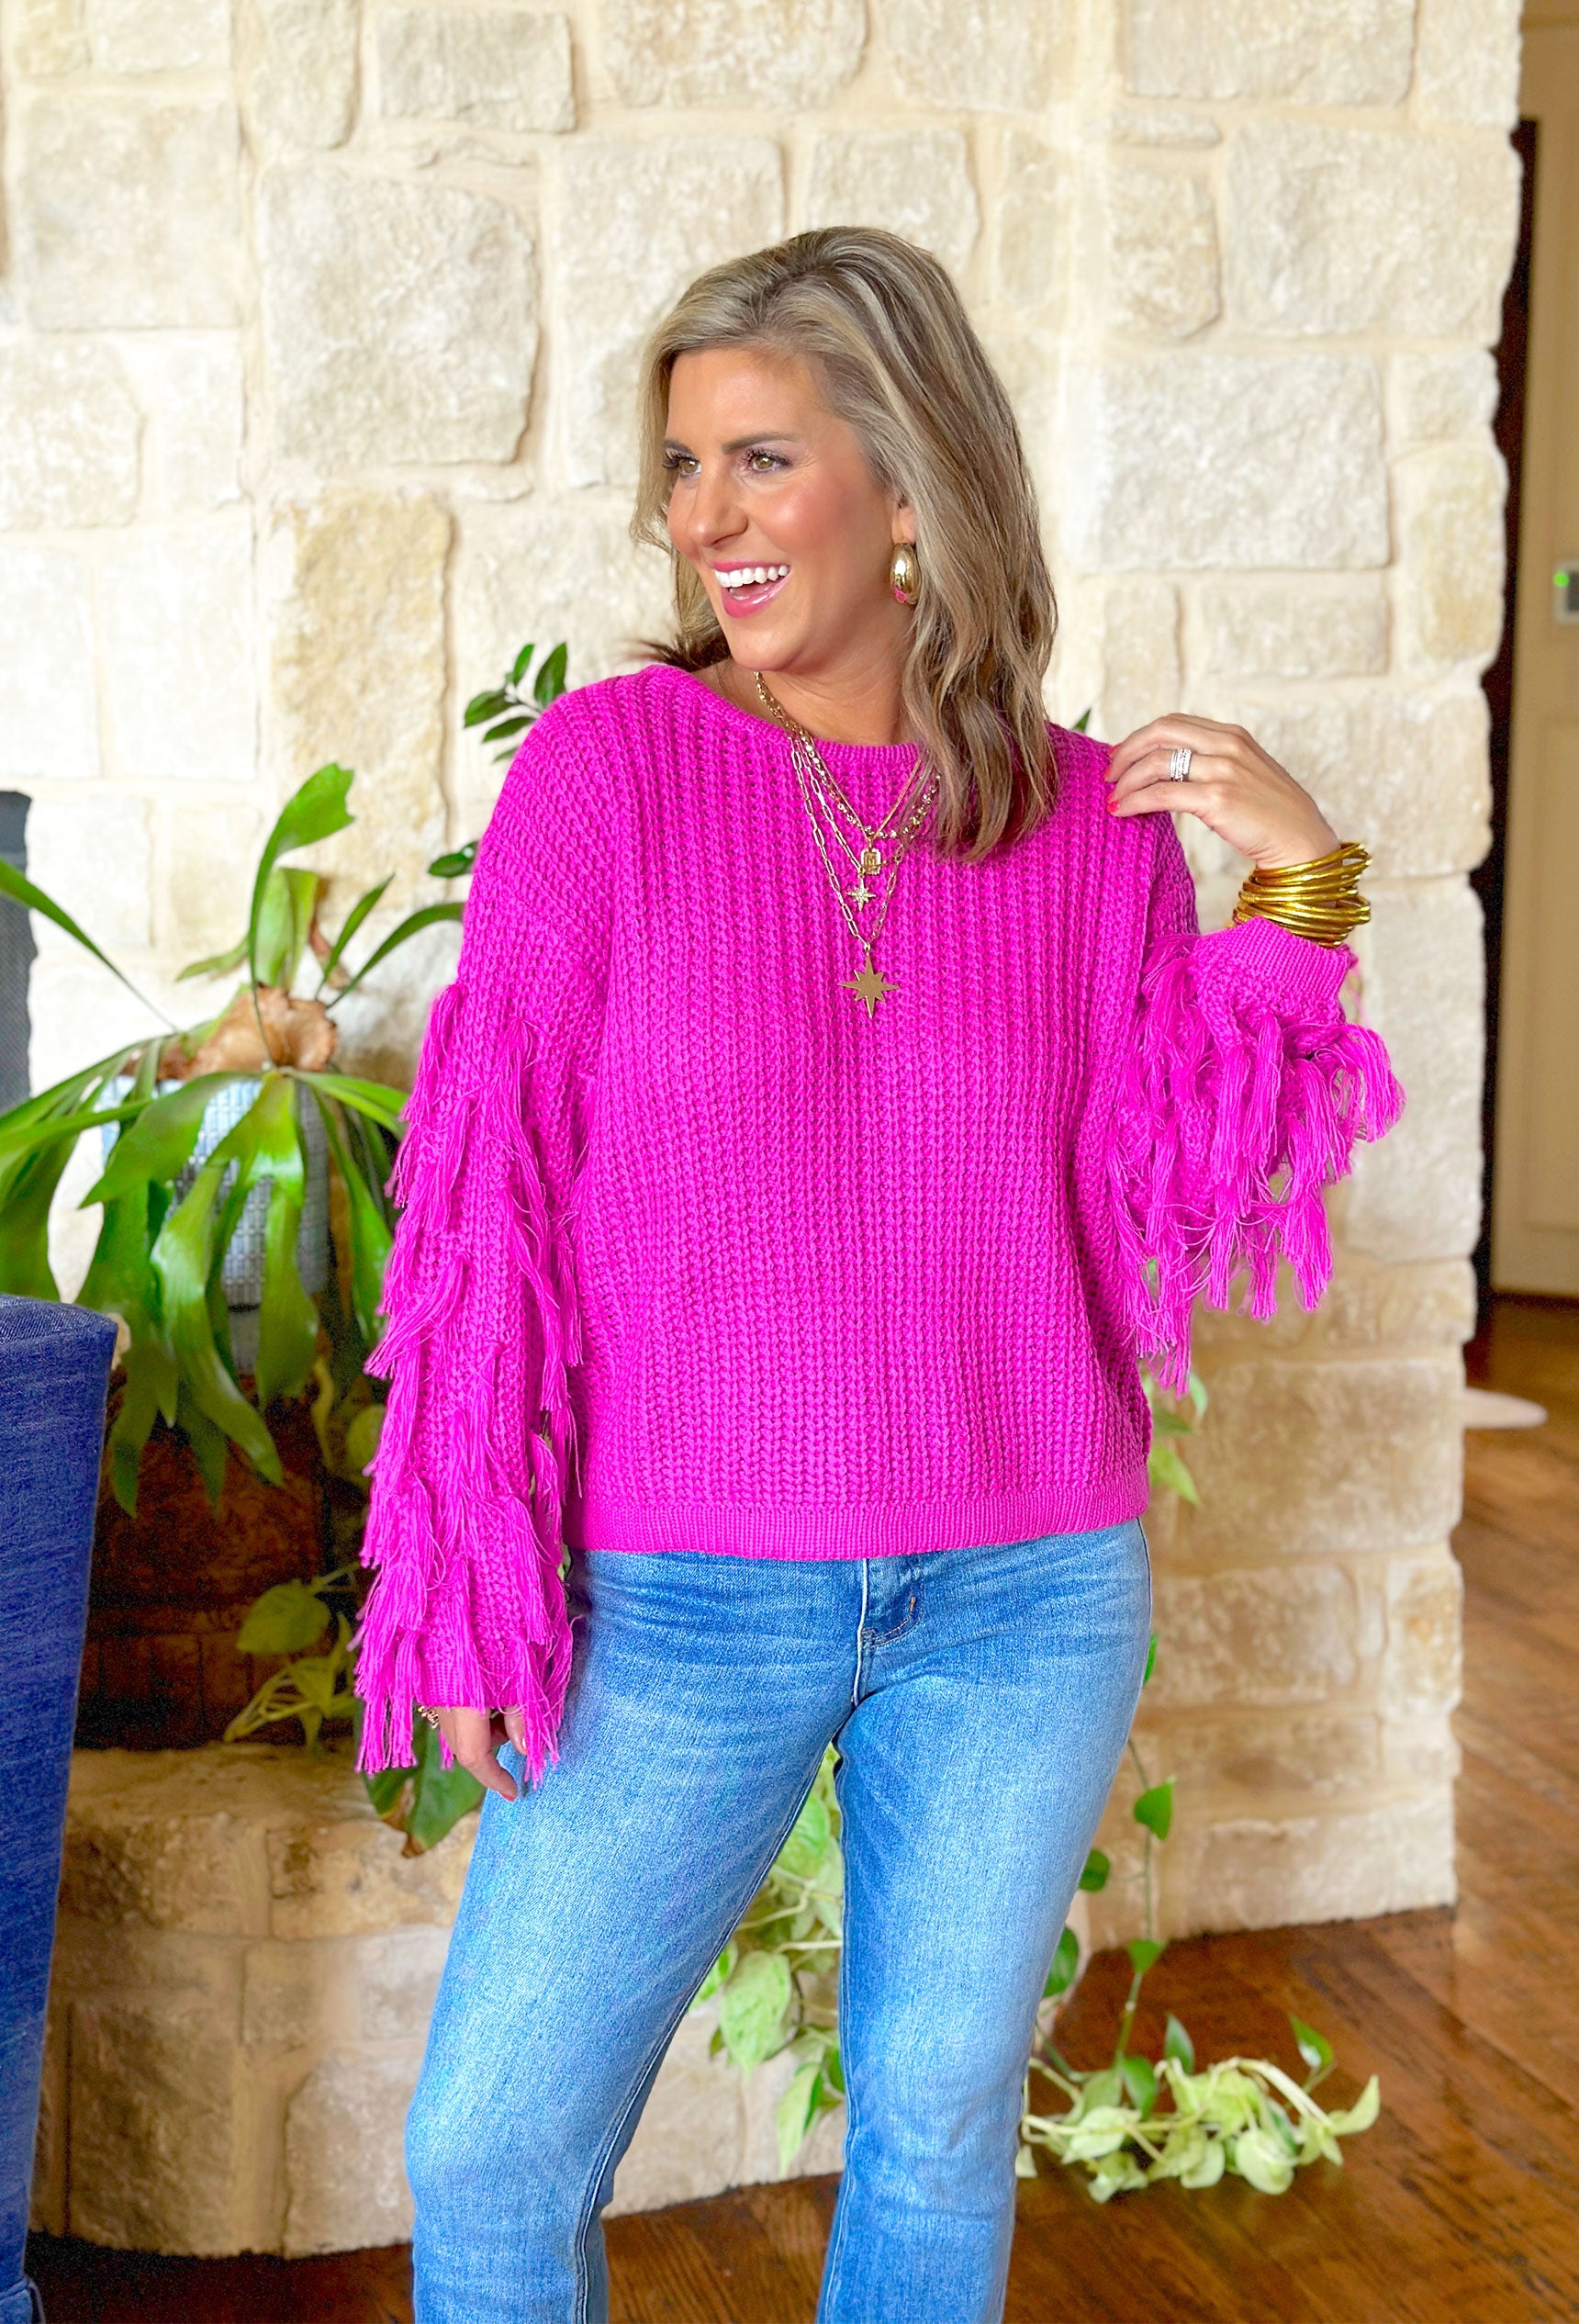 Eiffel Tower Flurries Sweater, bright magenta sweater with frayed tassels on the sleeves